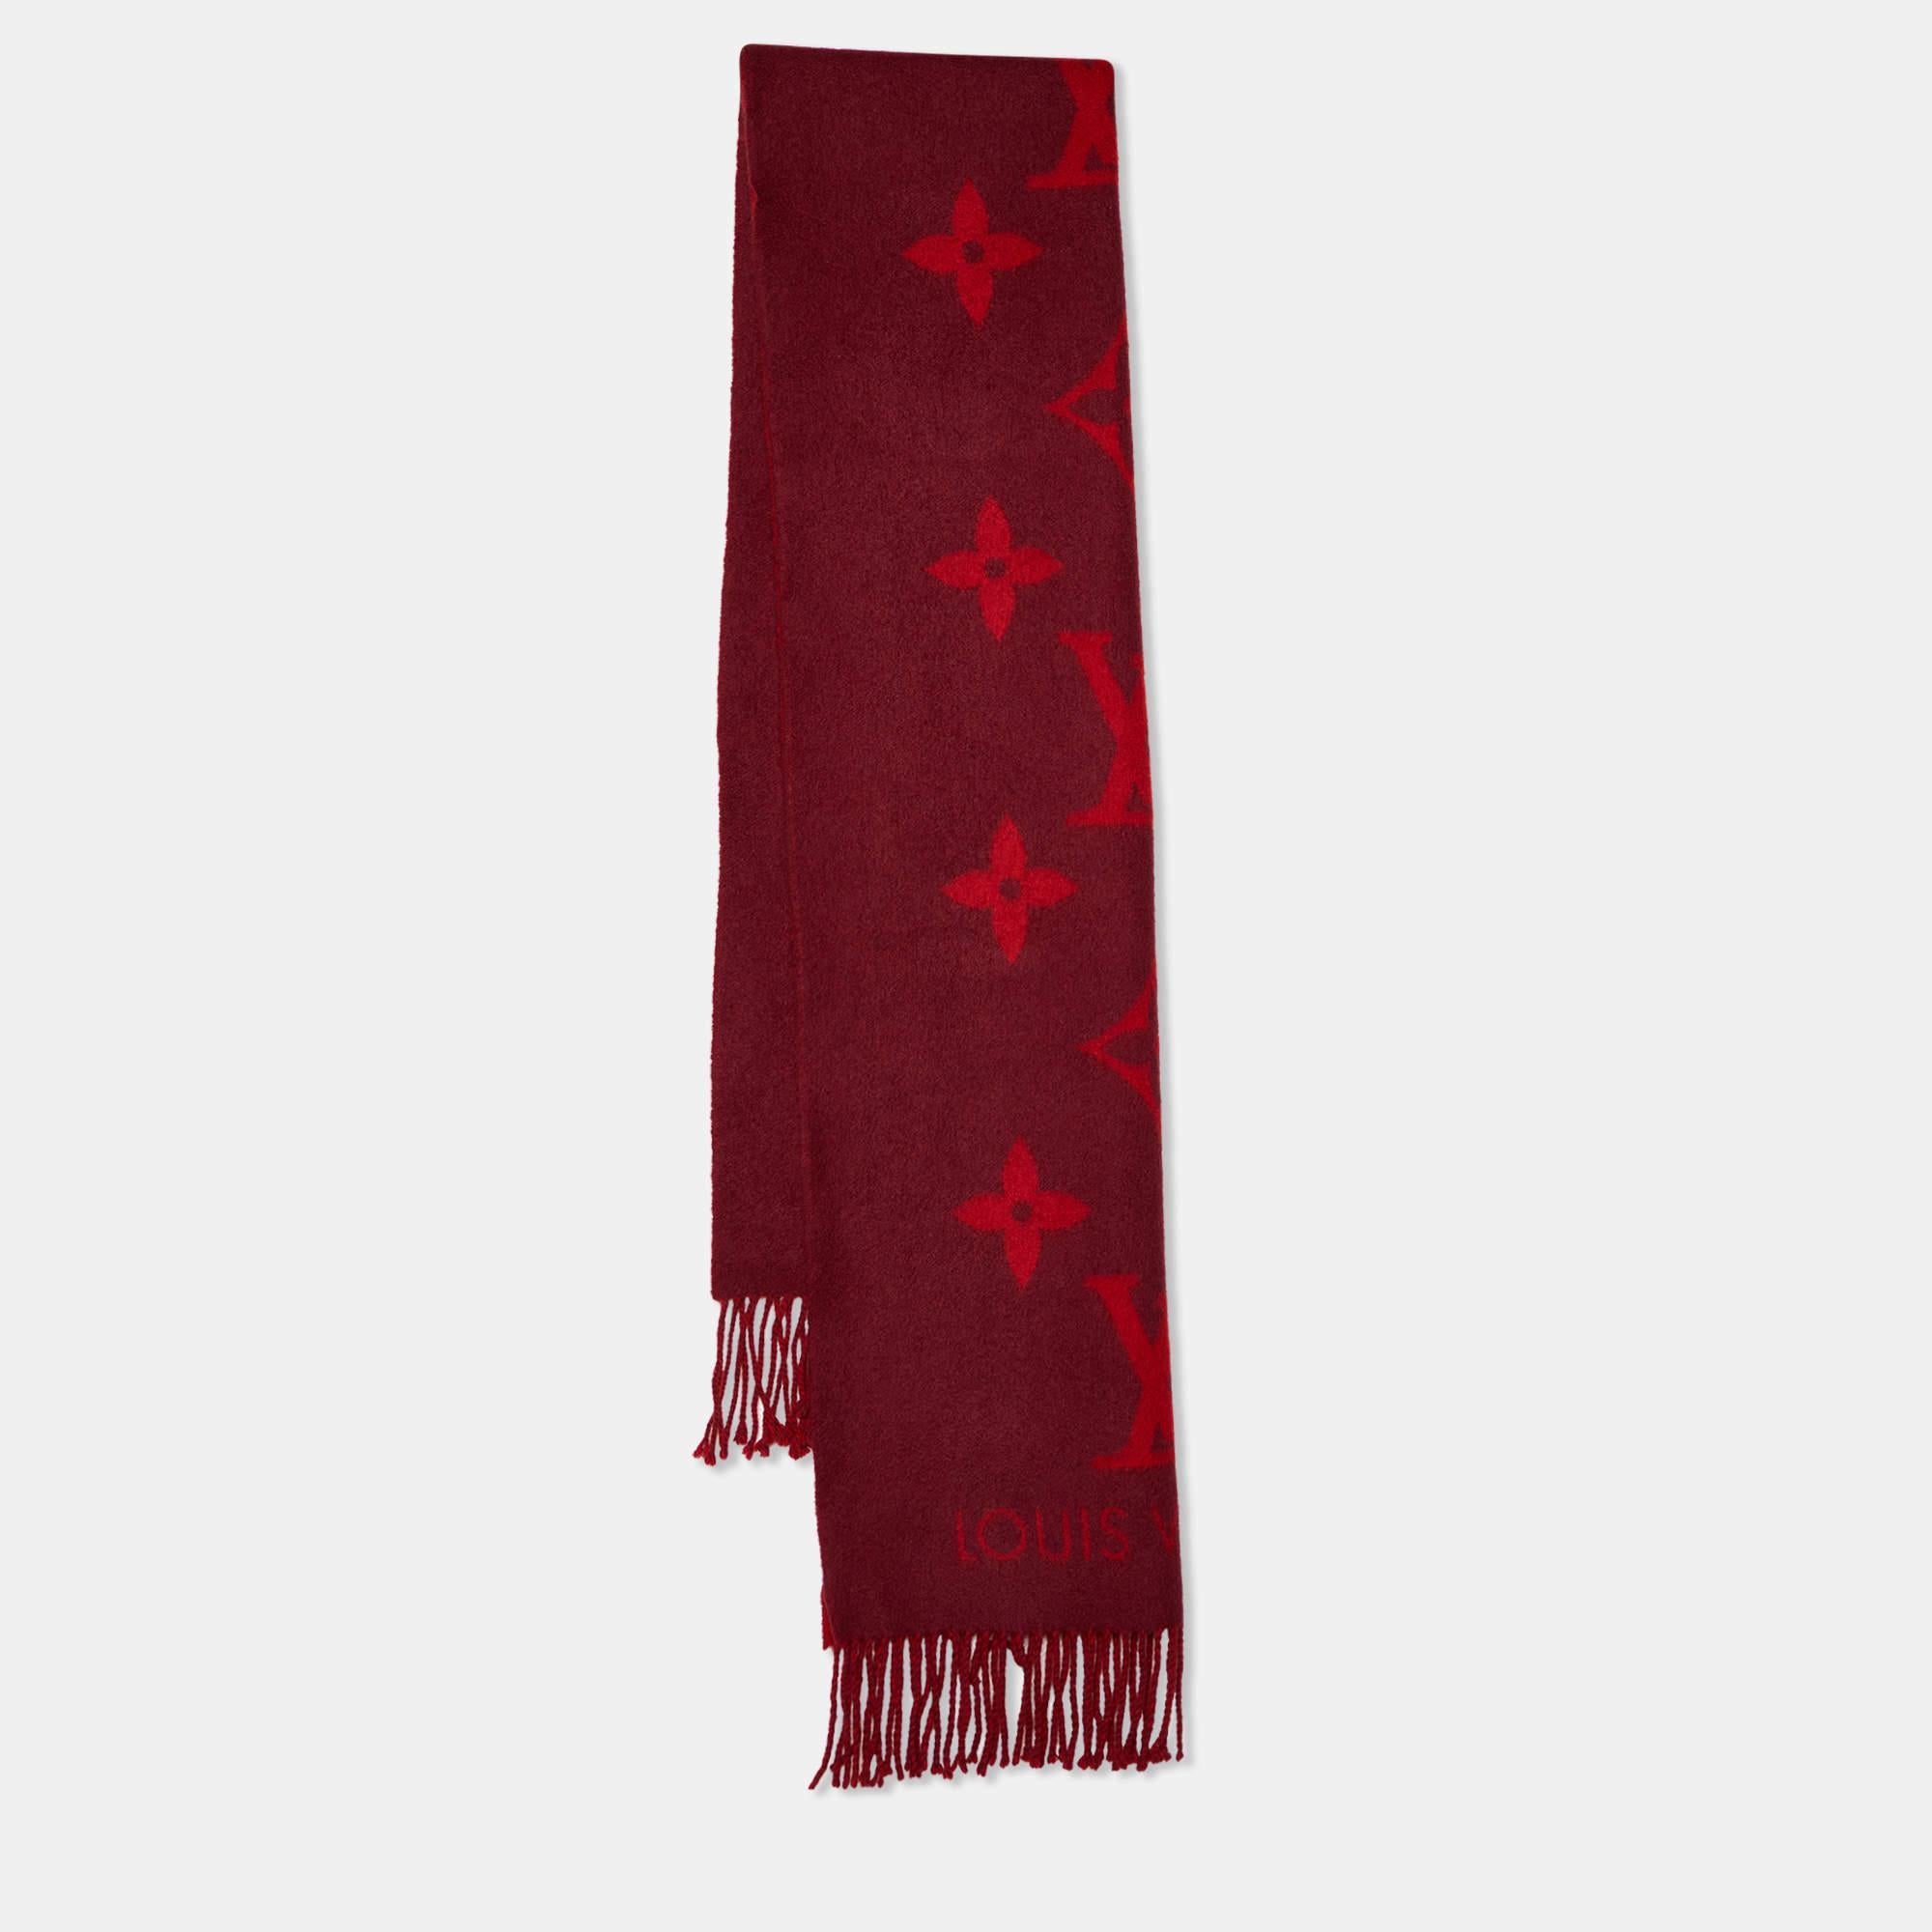 This designer scarf is a fun way to accessorise your outfits. It features a stylish design and is cut from smooth fabric. The scarf will surely elevate all your looks.

